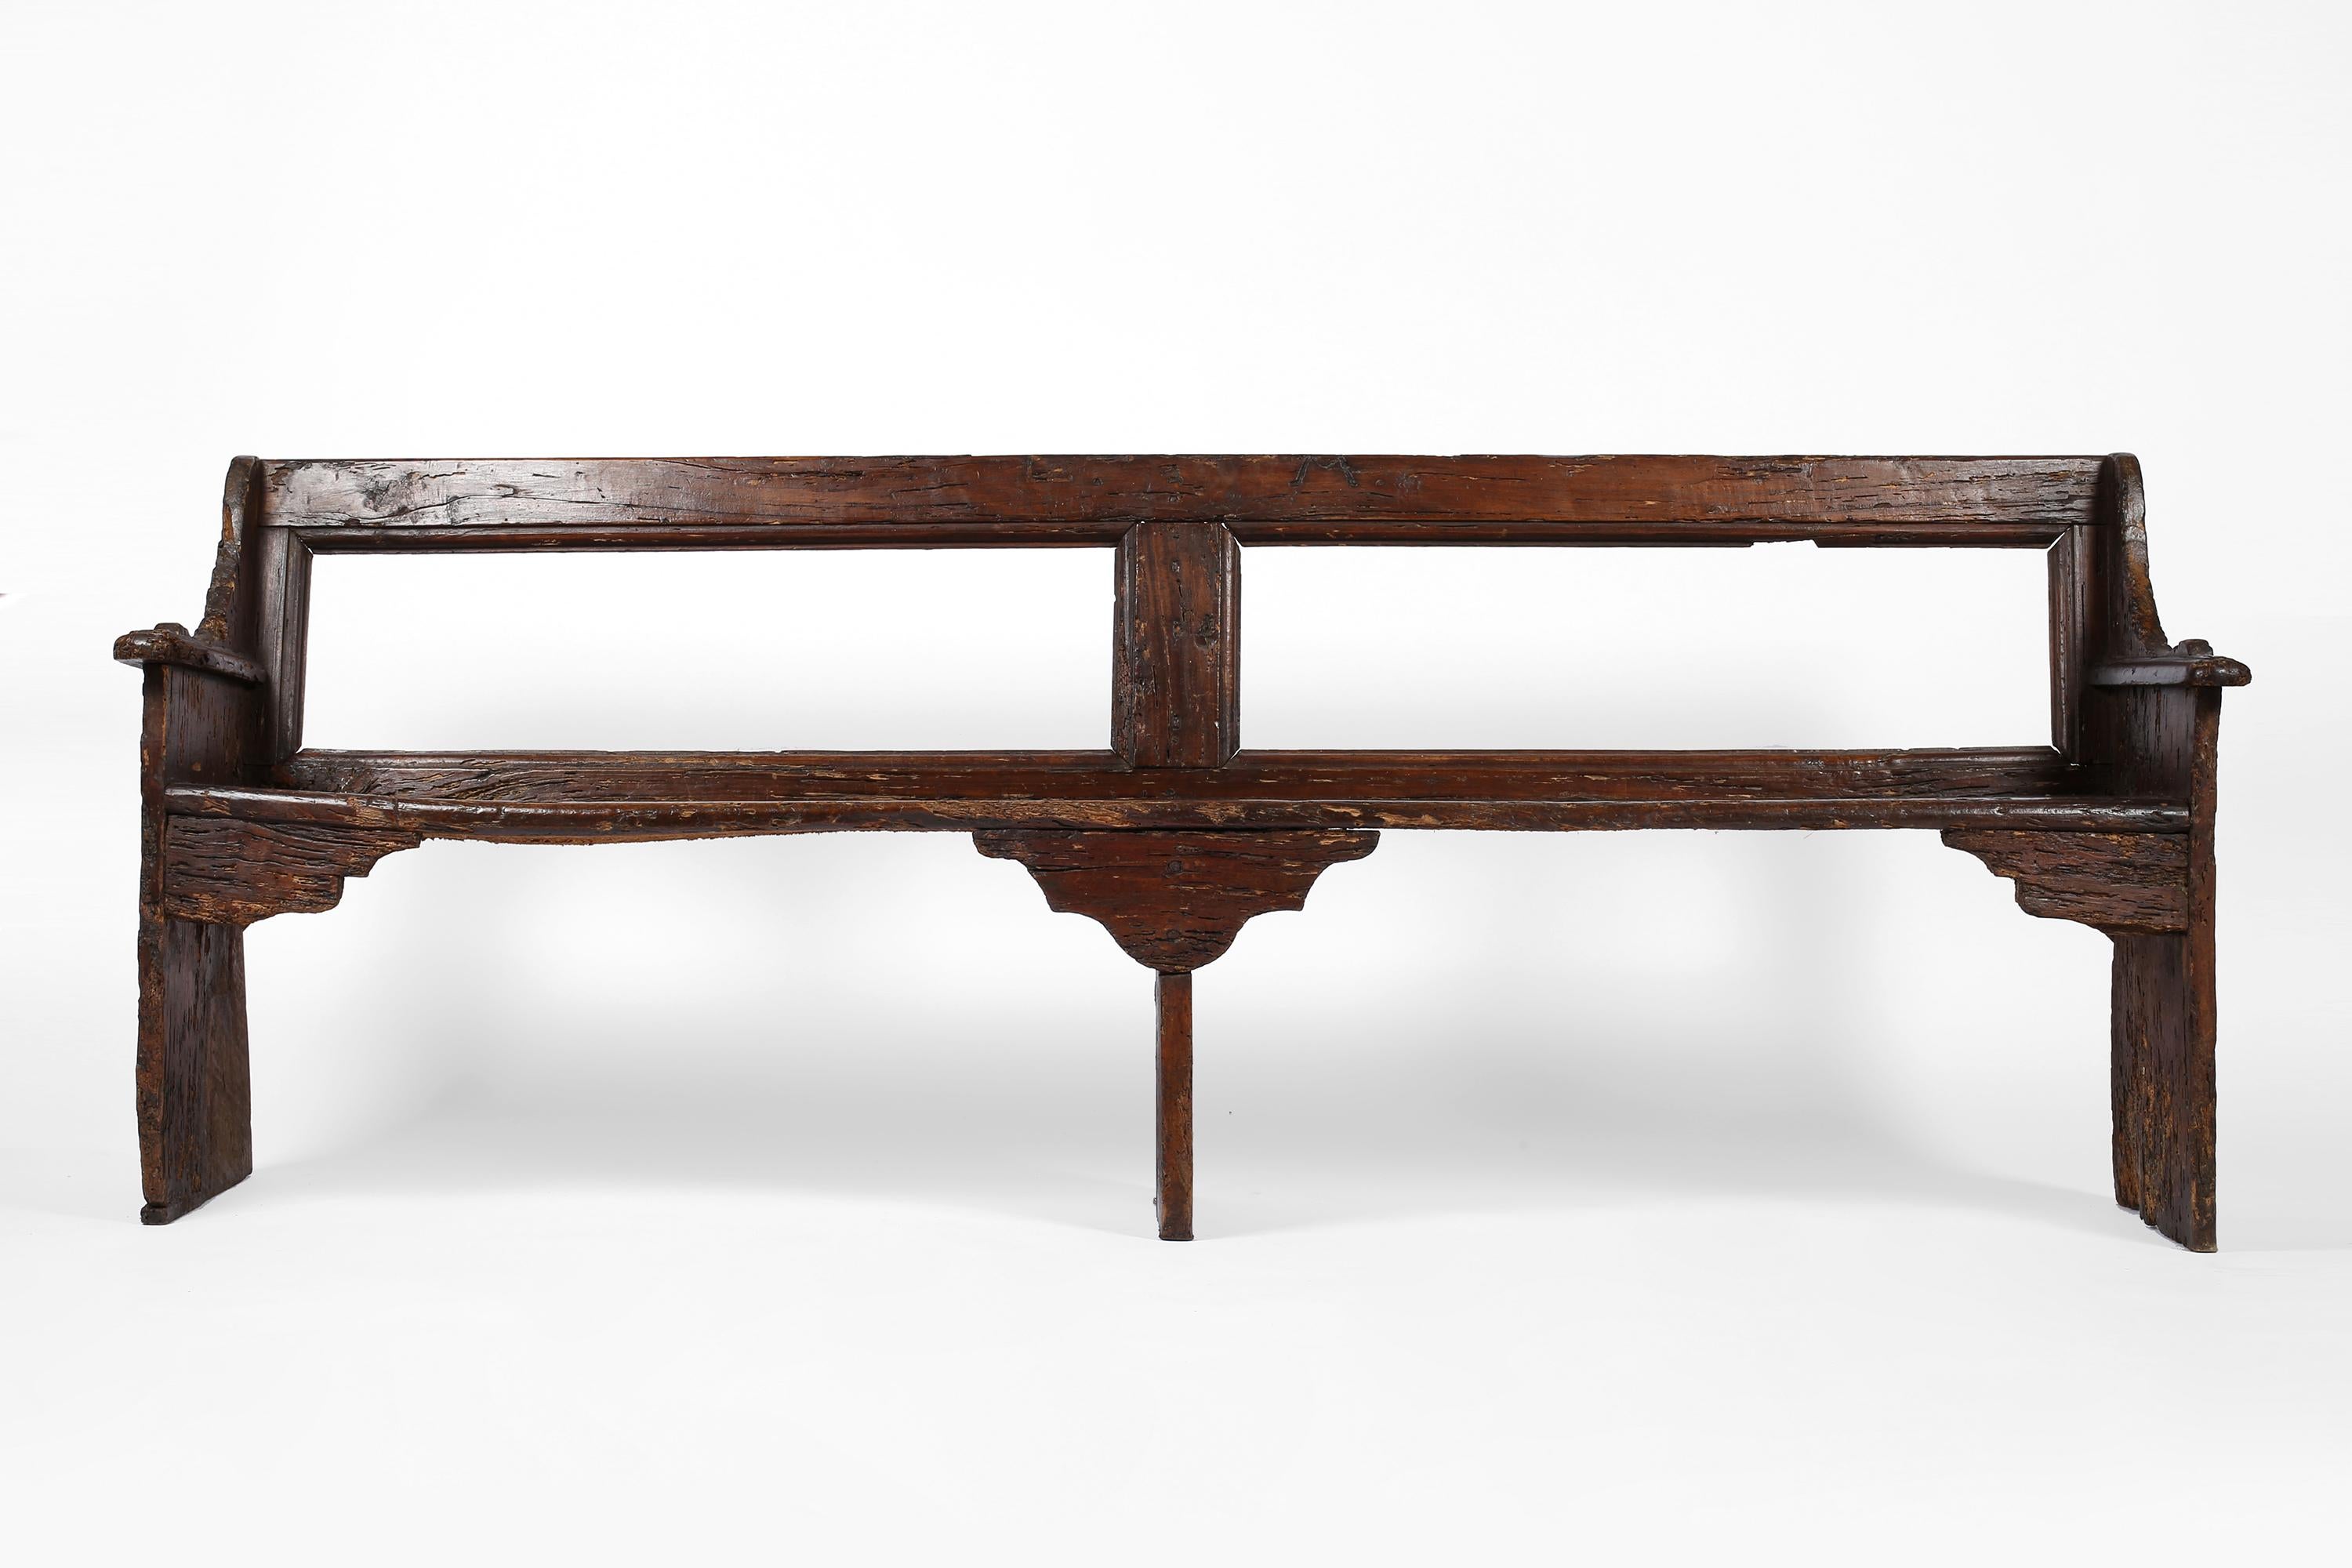 A rare surviving large 17th century walnut bench from Tuscany. Heavily patinated and full of character, with historic repairs adding to its charm. Bearing the letter M to the backrest - likely to identify the original owner or maker of the bench.